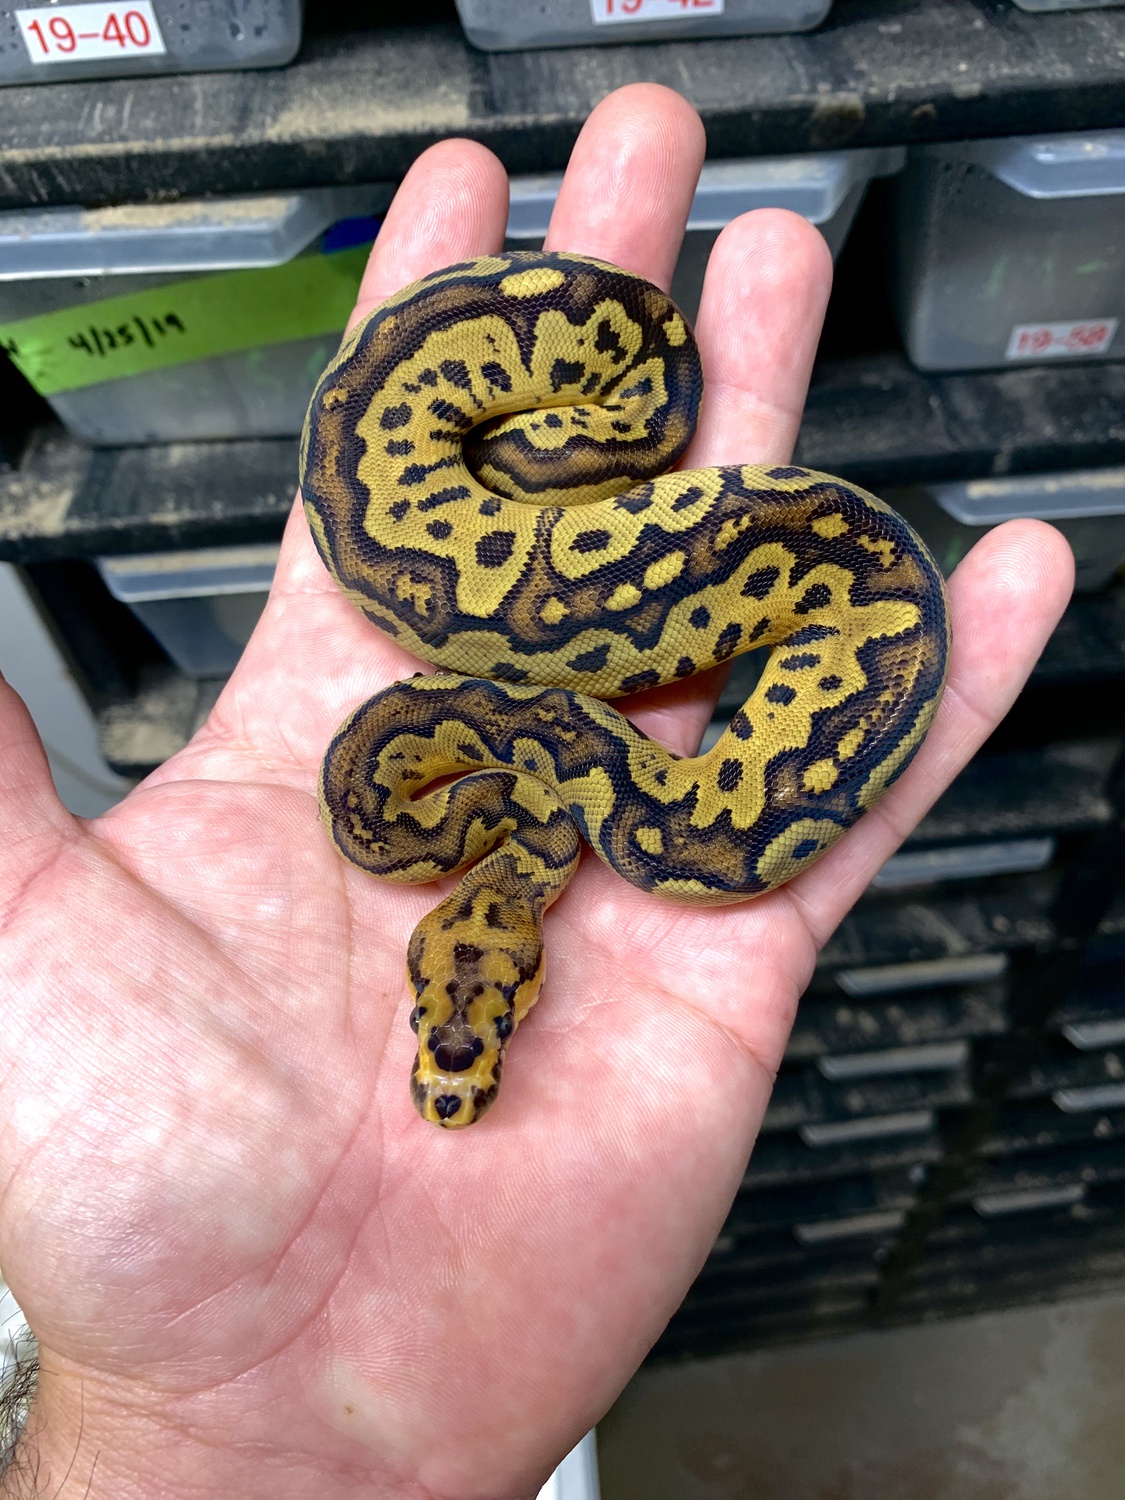 Carbon Fire Clown Ball Python by American Royals